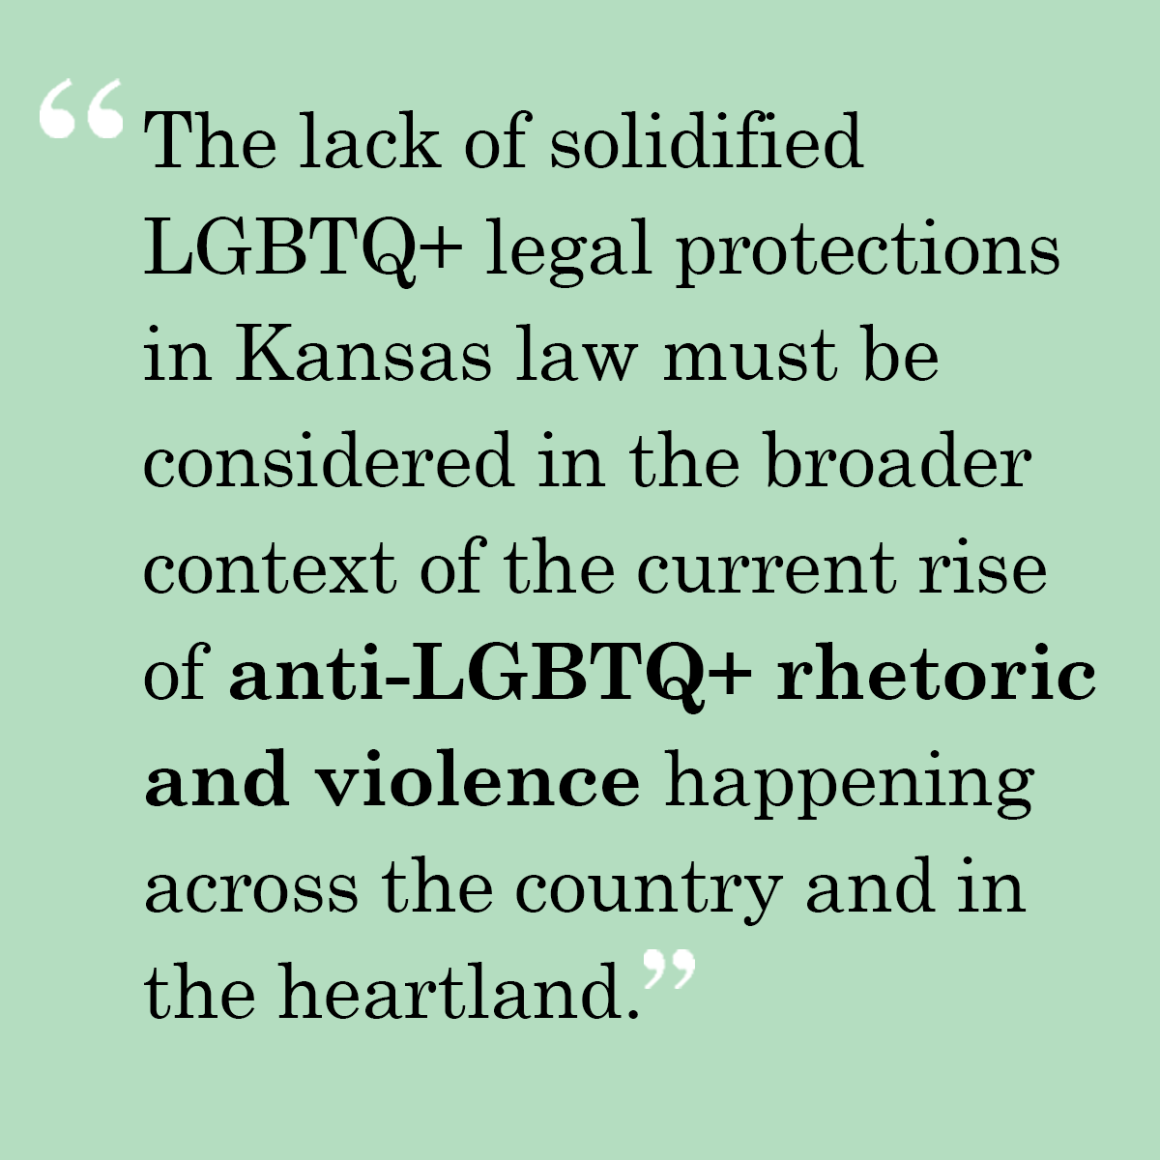 The lack of solidified LGBTQ+ legal protections in Kansas law must be considered in the broader context of the current rise of anti-LGBTQ+ rhetoric and violence happening across the country and in the heartland